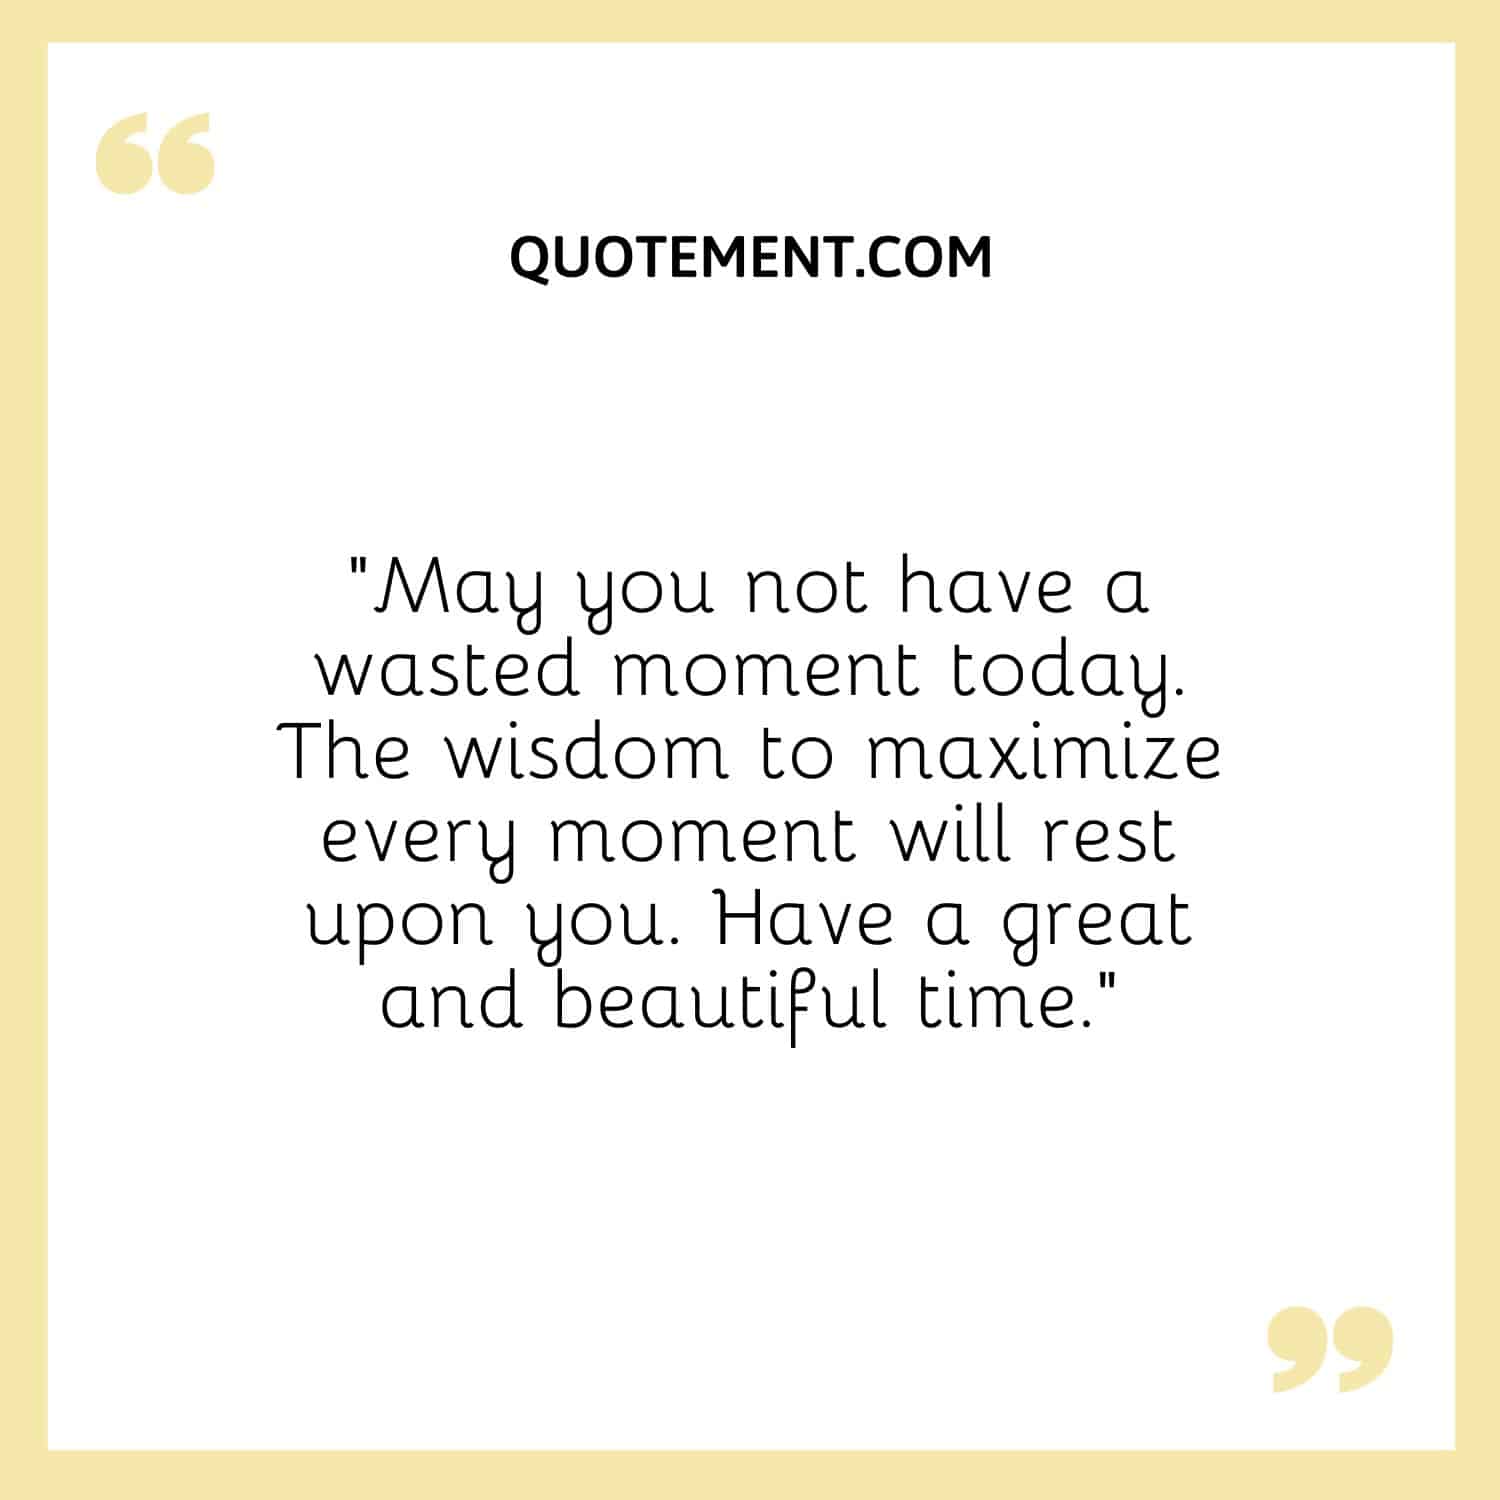 “May you not have a wasted moment today. The wisdom to maximize every moment will rest upon you. Have a great and beautiful time.”